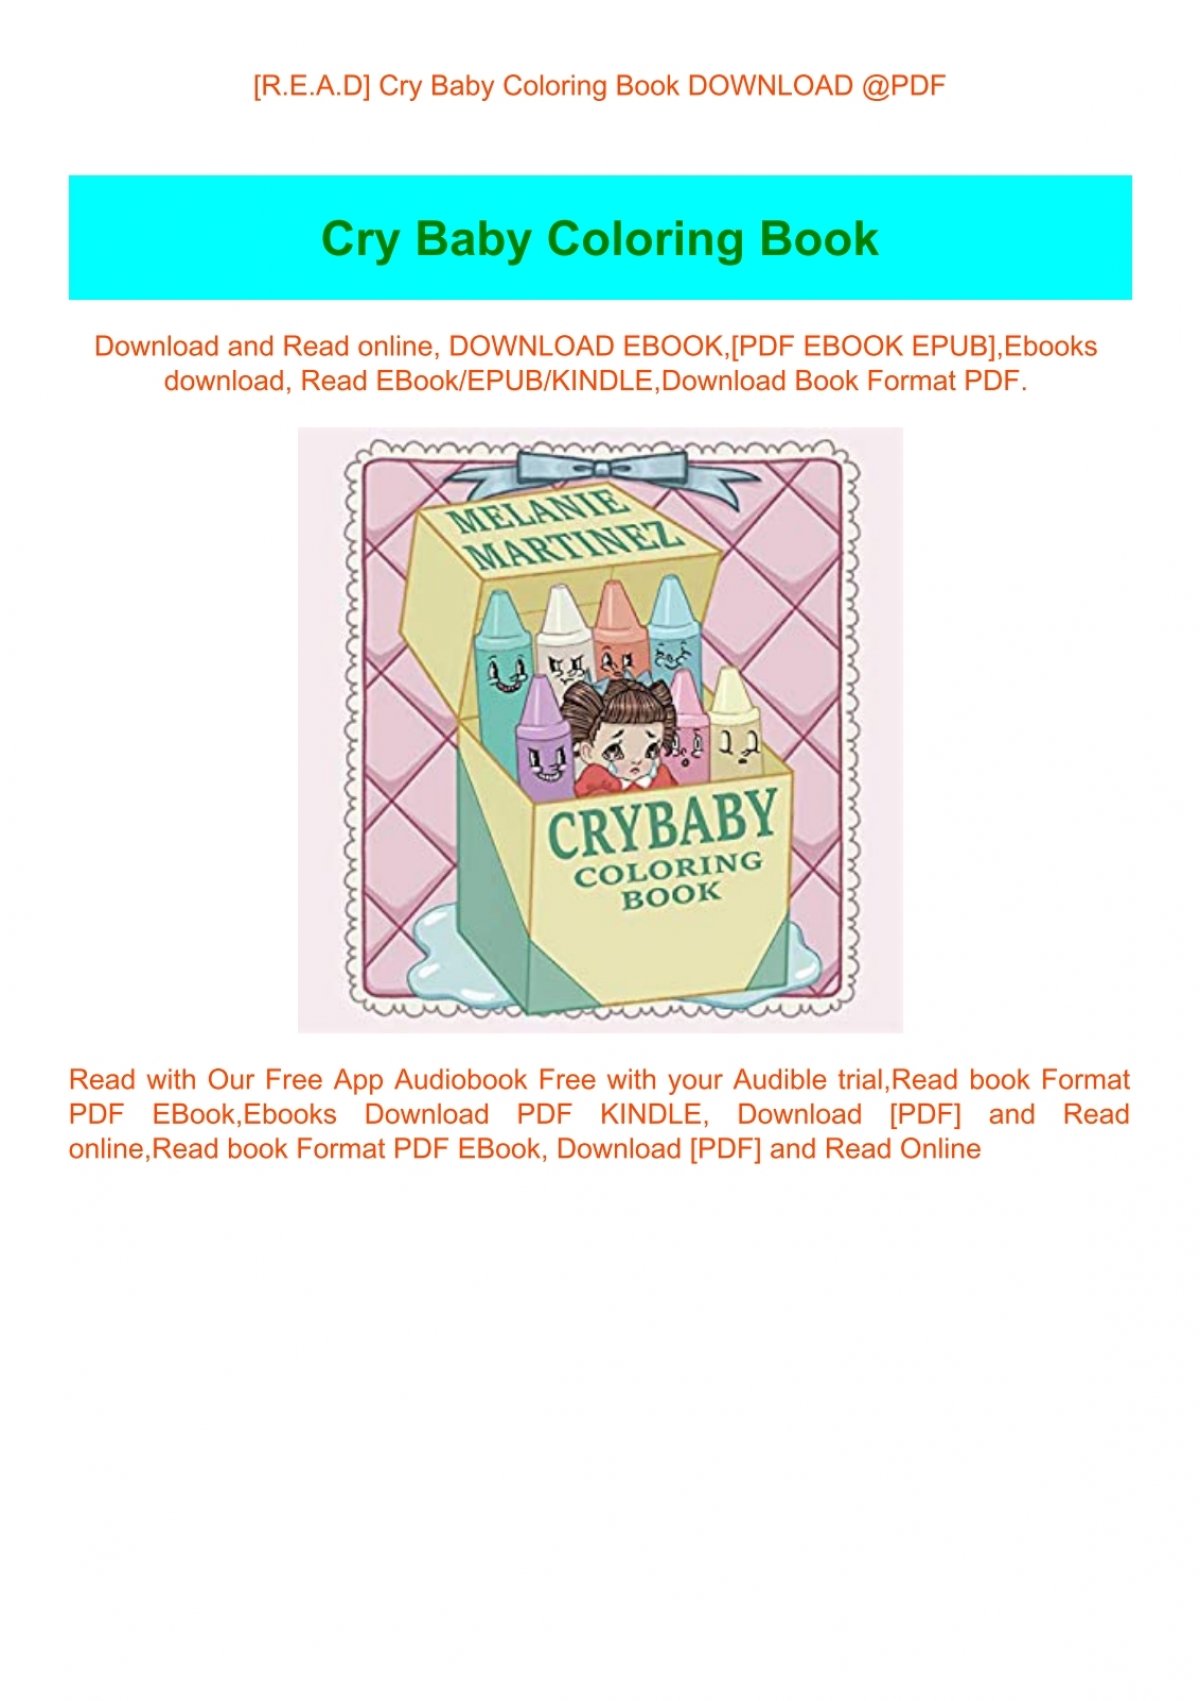 Download R E A D Cry Baby Coloring Book Download Pdf